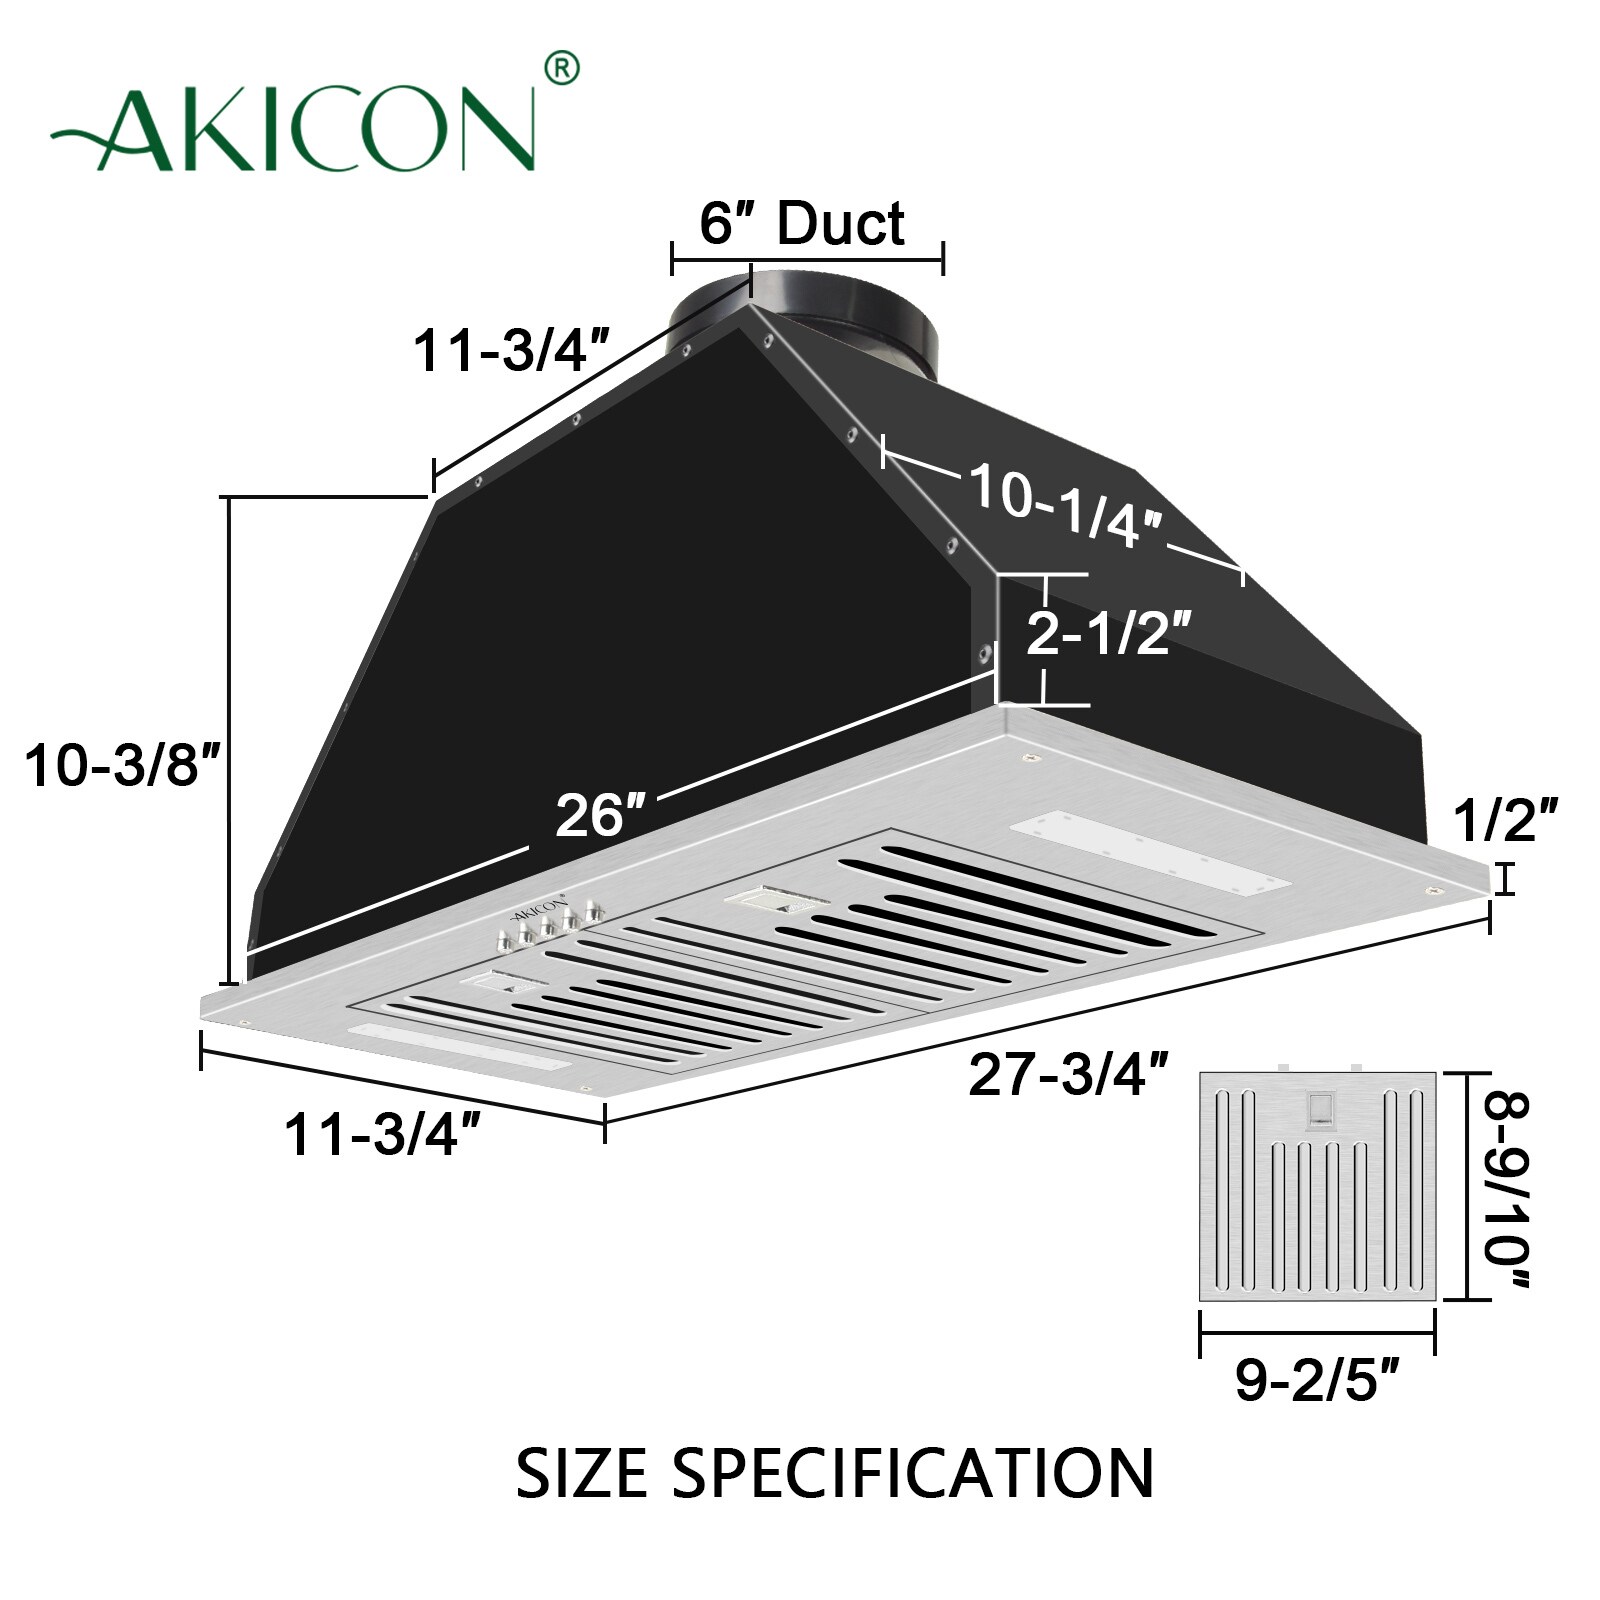 Akicon 30 in. 600 CFM Ducted Insert Range Hood in Stainless Steel NX-Hood  30 - The Home Depot